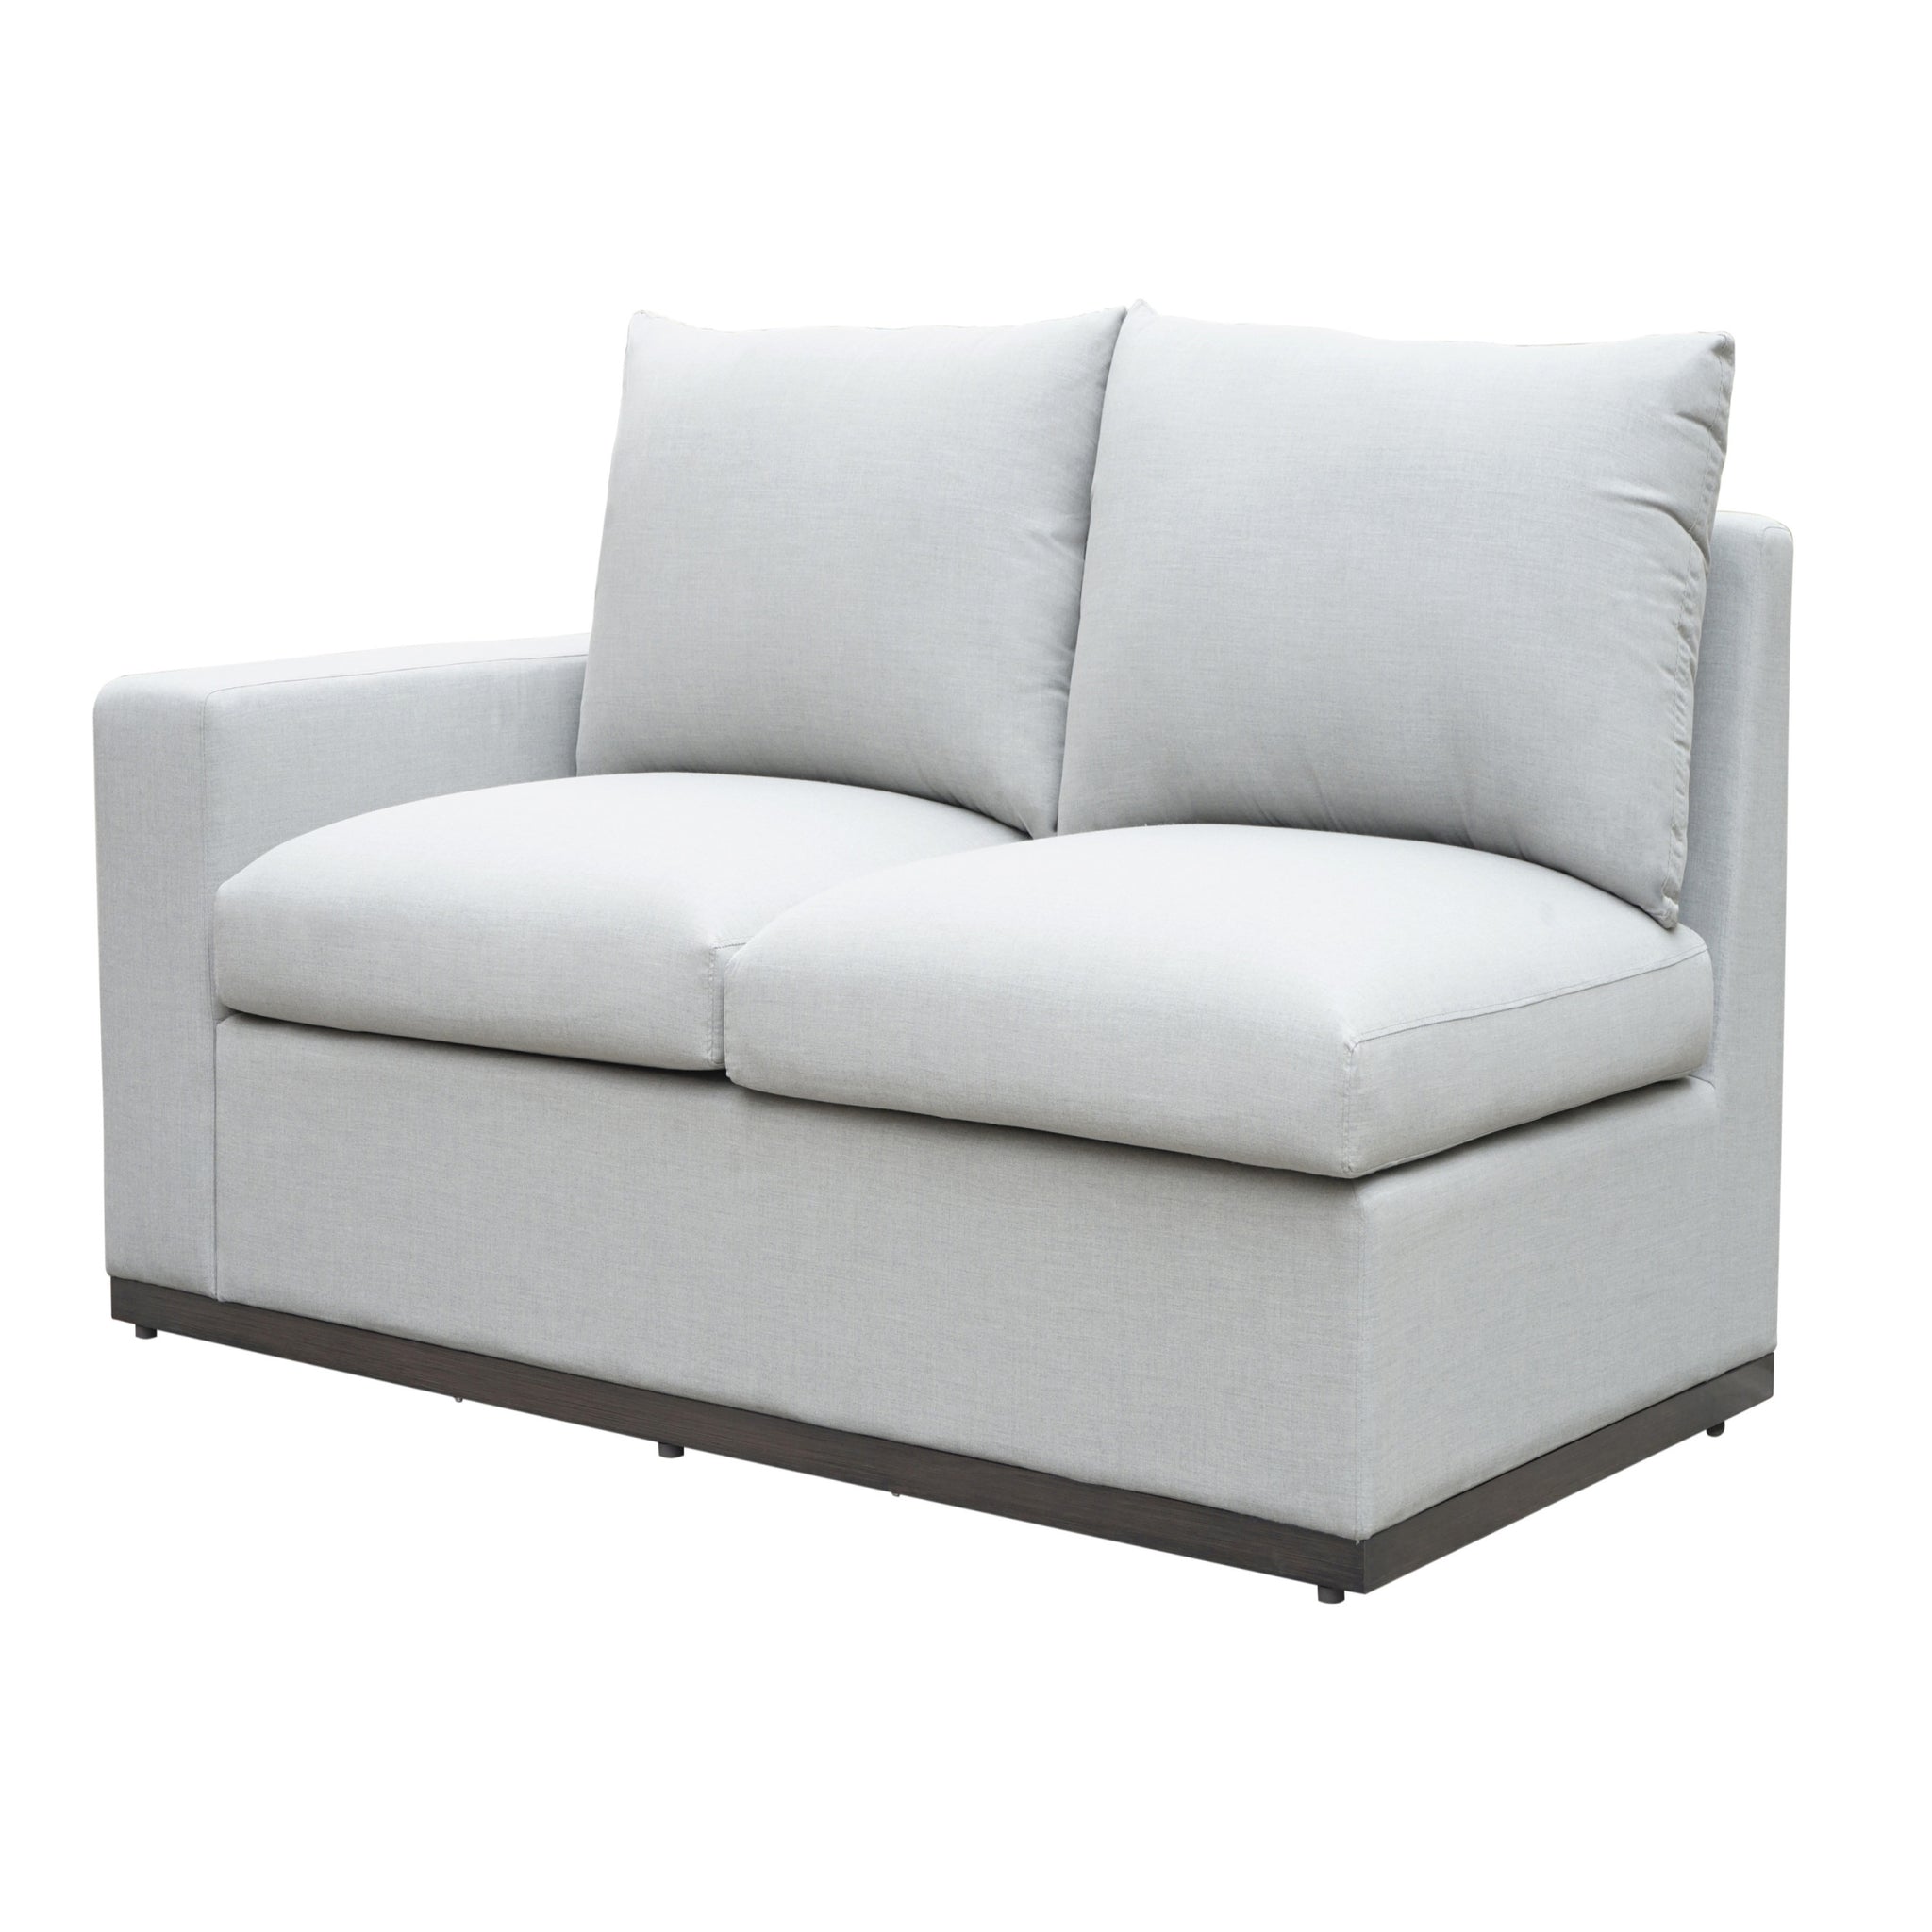 Luxurious Outdoor Chofa Sofa Chaise Generously